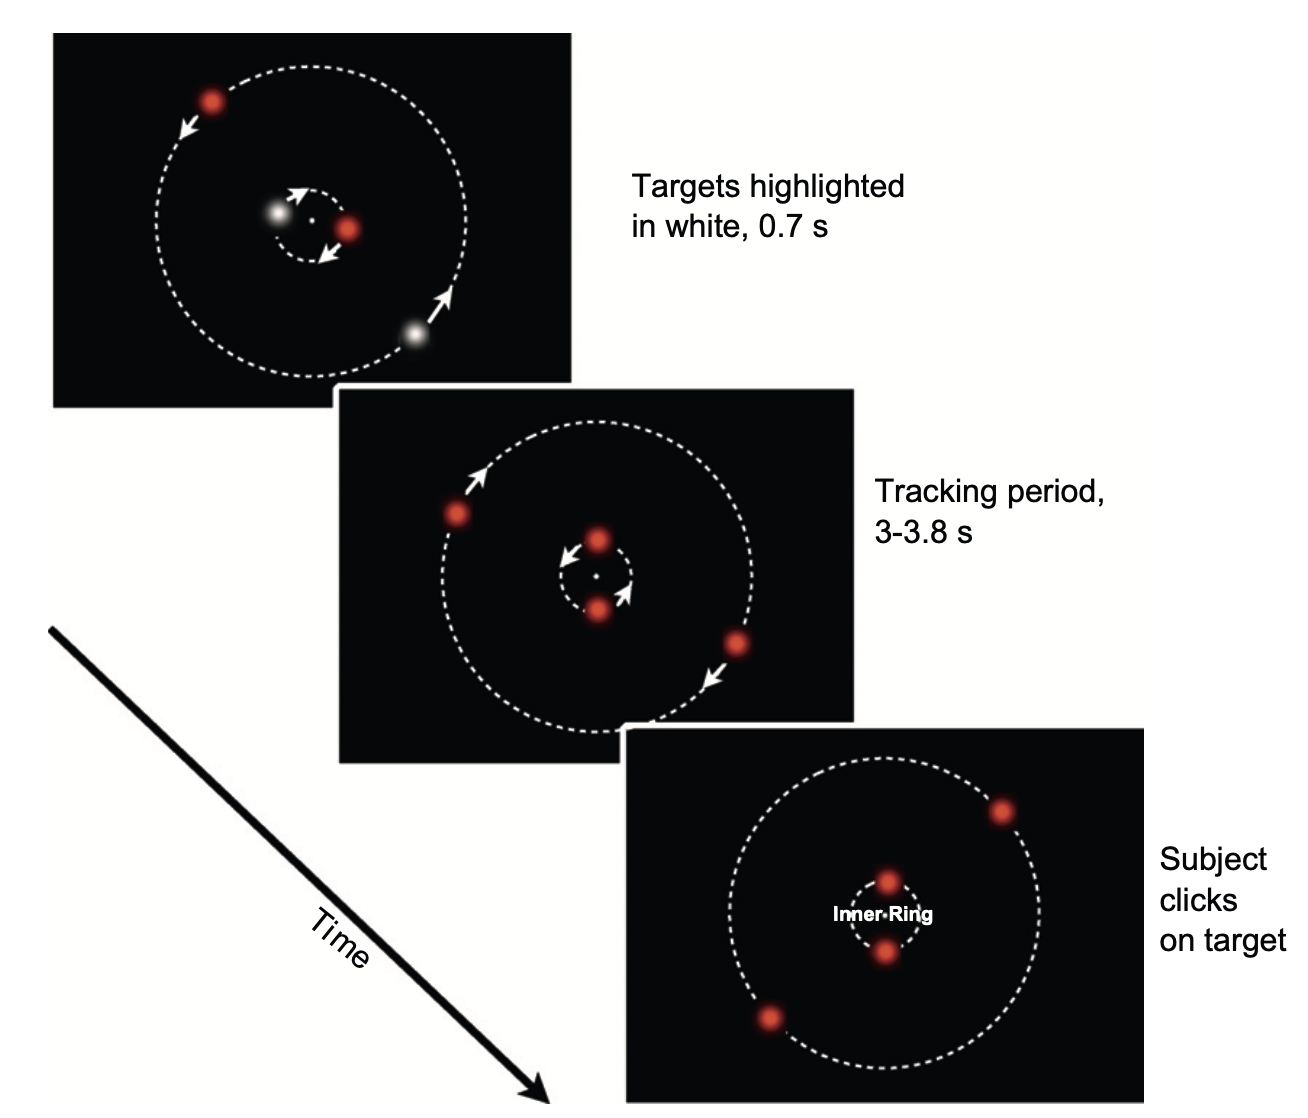 In experiments by Holcombe and Chen (2012), after the targets were highlighted in white, all the discs became red and revolved about the fixation point. During this interval, each pair of discs occasionally reversed their direction. After 3–3.8 s, the discs stop, one ring is indicated, and the participant clicks on one disc of that ring.